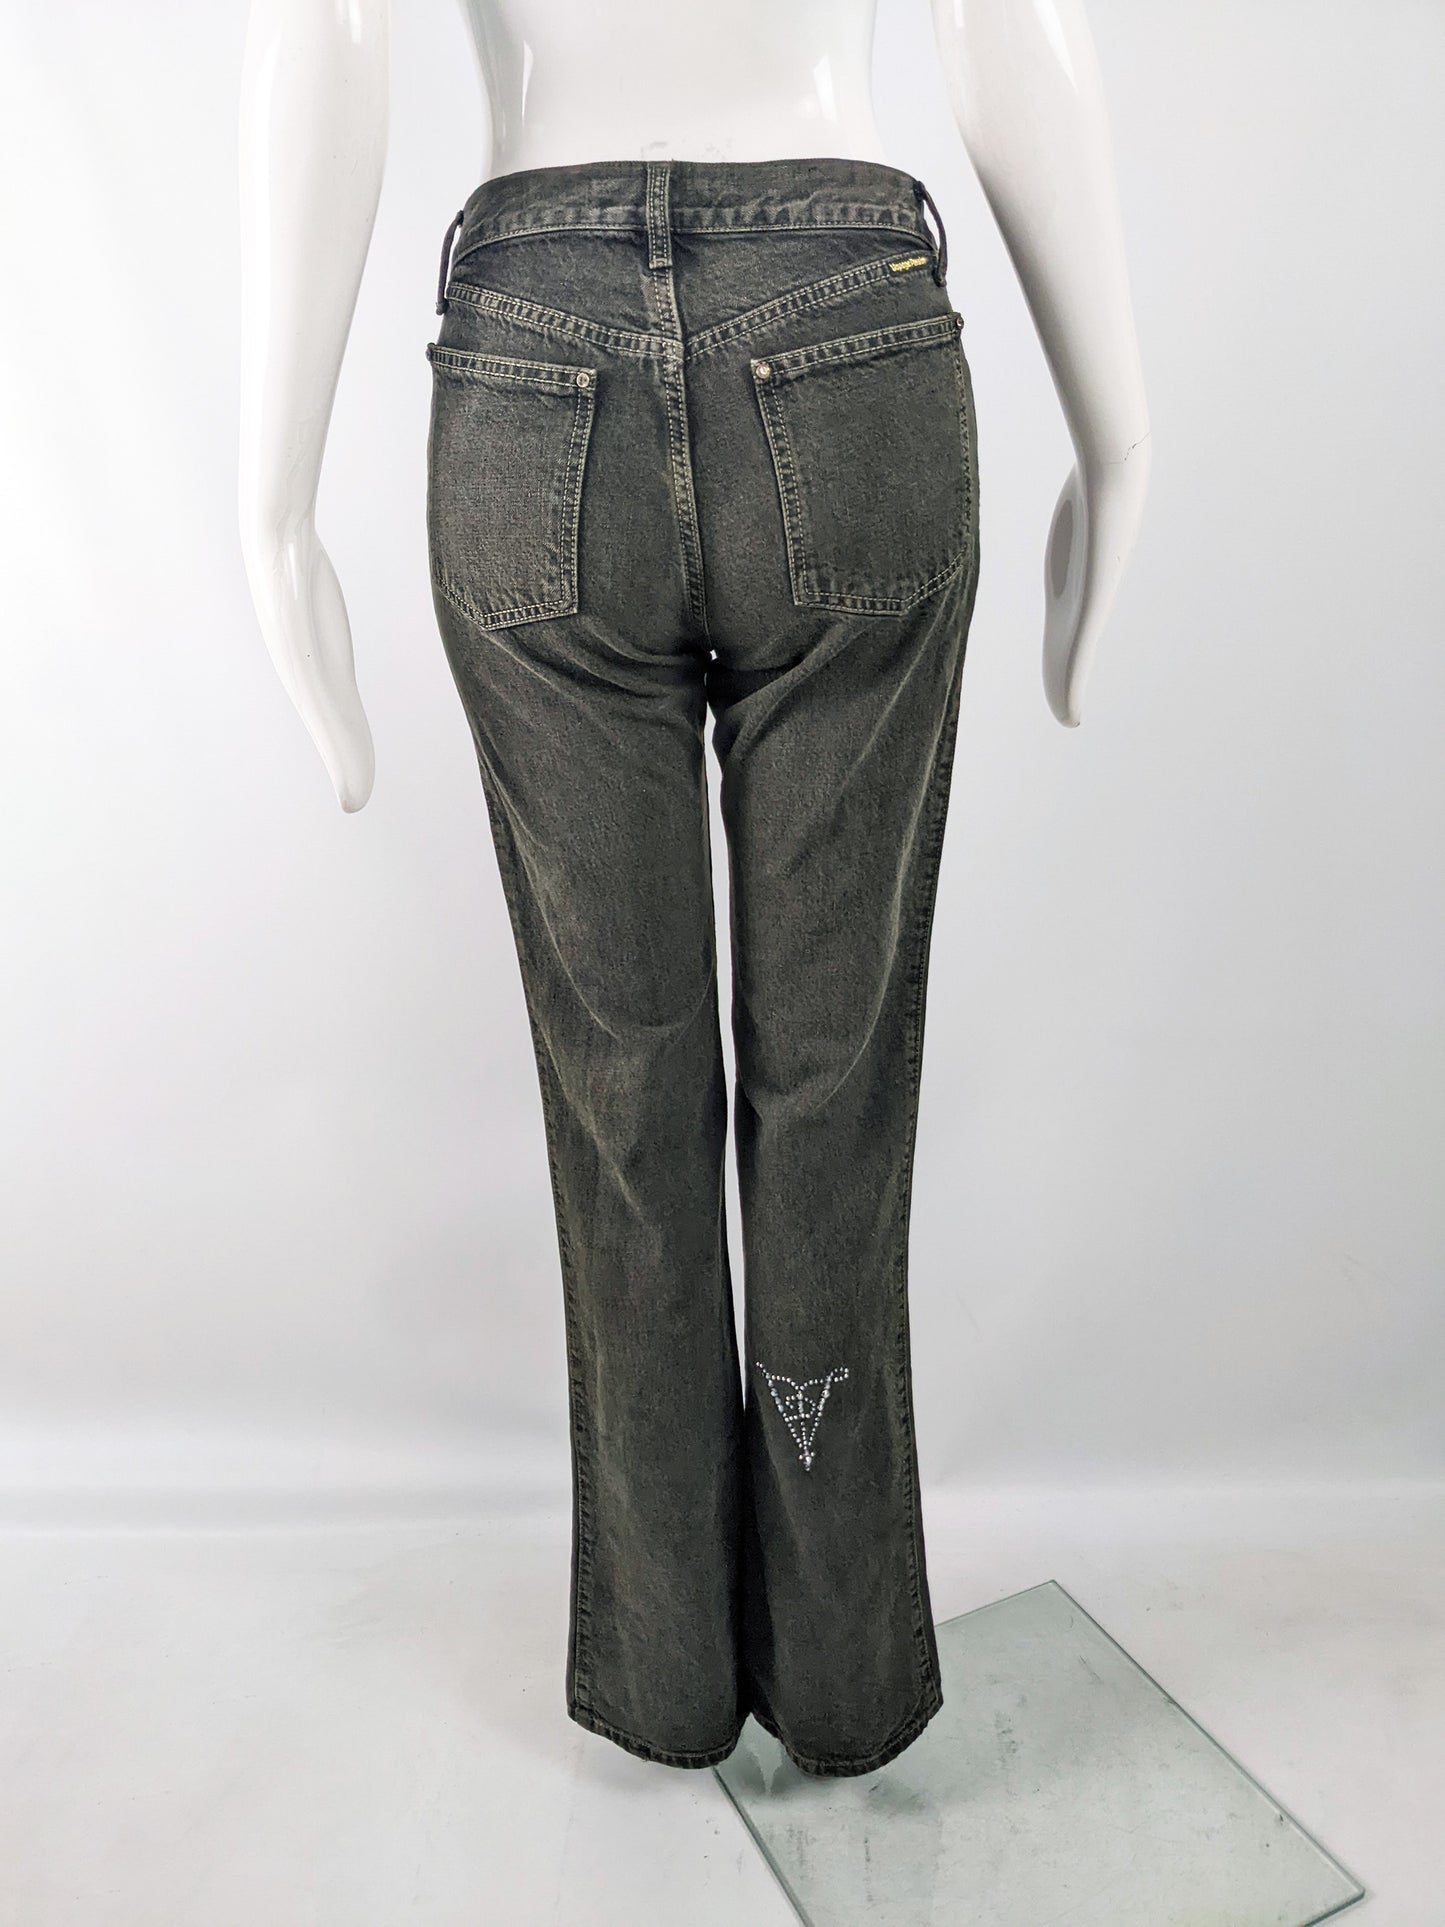 Voyage Passion Vintage Womens y2k Woven Ribbon Jeans, 2000s